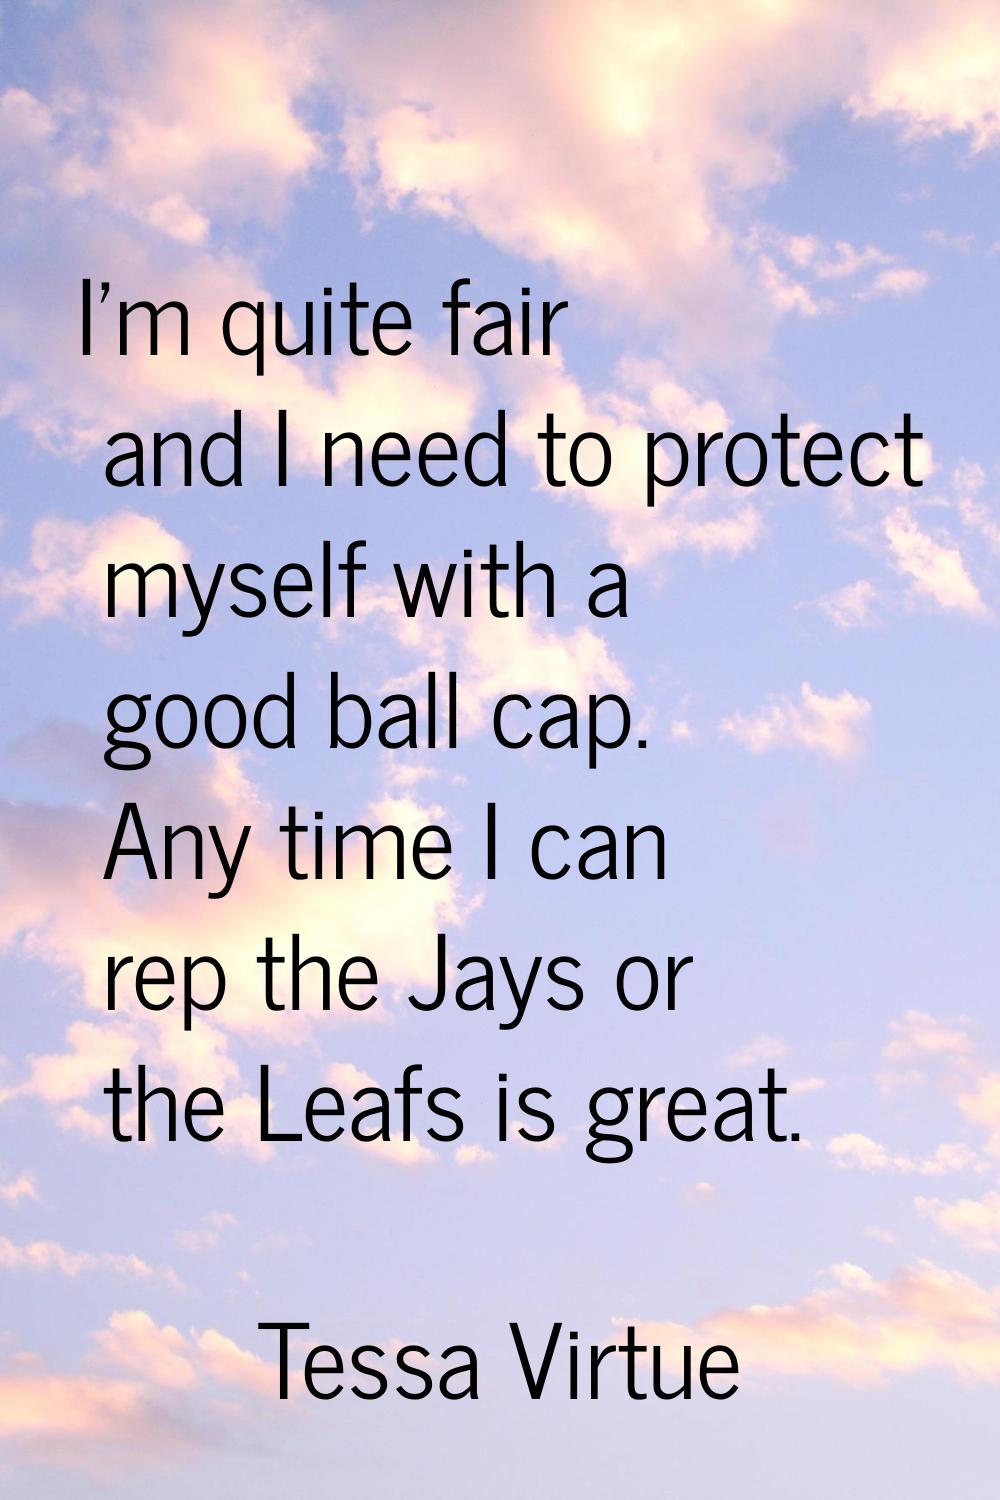 I'm quite fair and I need to protect myself with a good ball cap. Any time I can rep the Jays or th